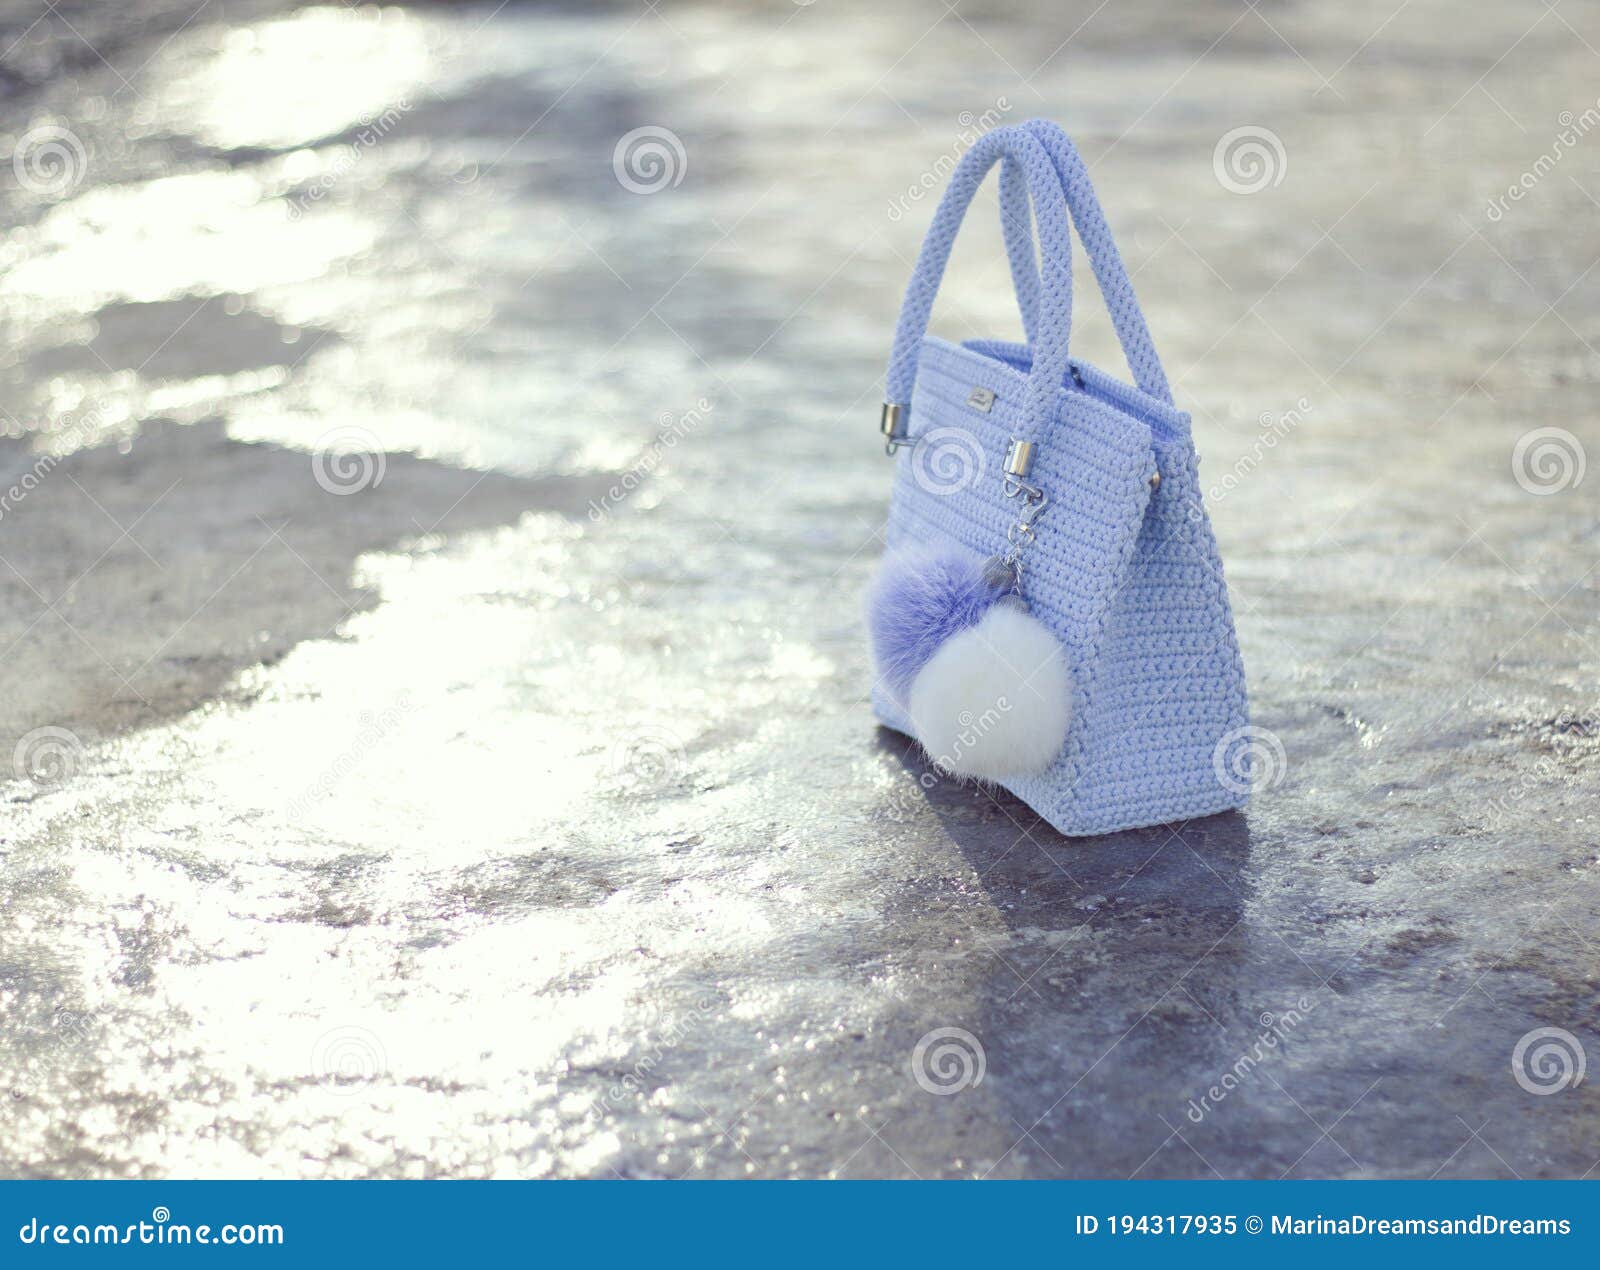 handmade light blue textile knitted bag with pompons